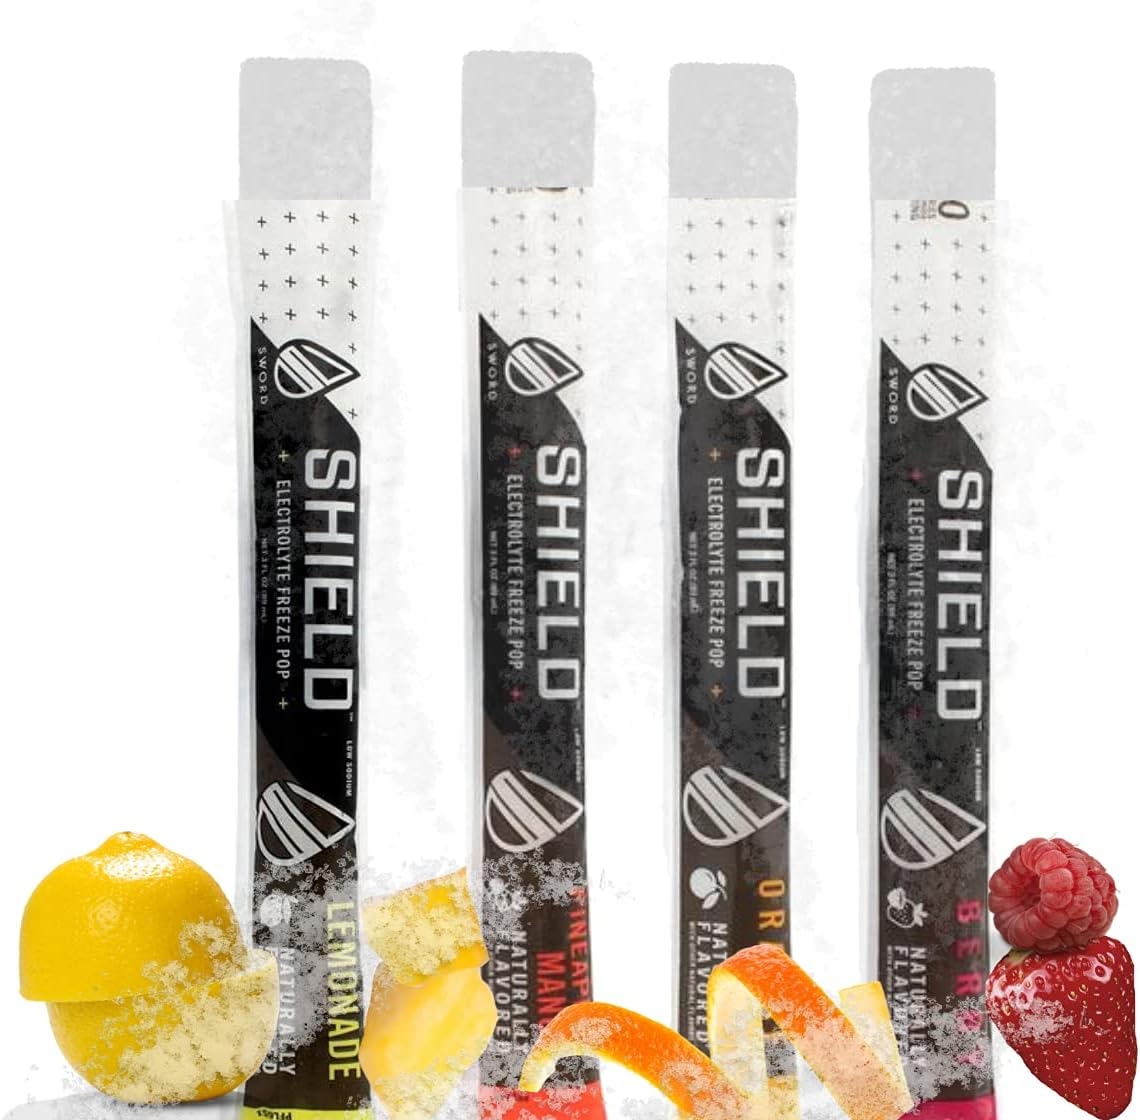 Shield by Sword Performance Freezer Pops Assorted, 36 PK, Electrolytes, Low Sugar, Scientifically Balanced, Great Tasting Cooling Hydration